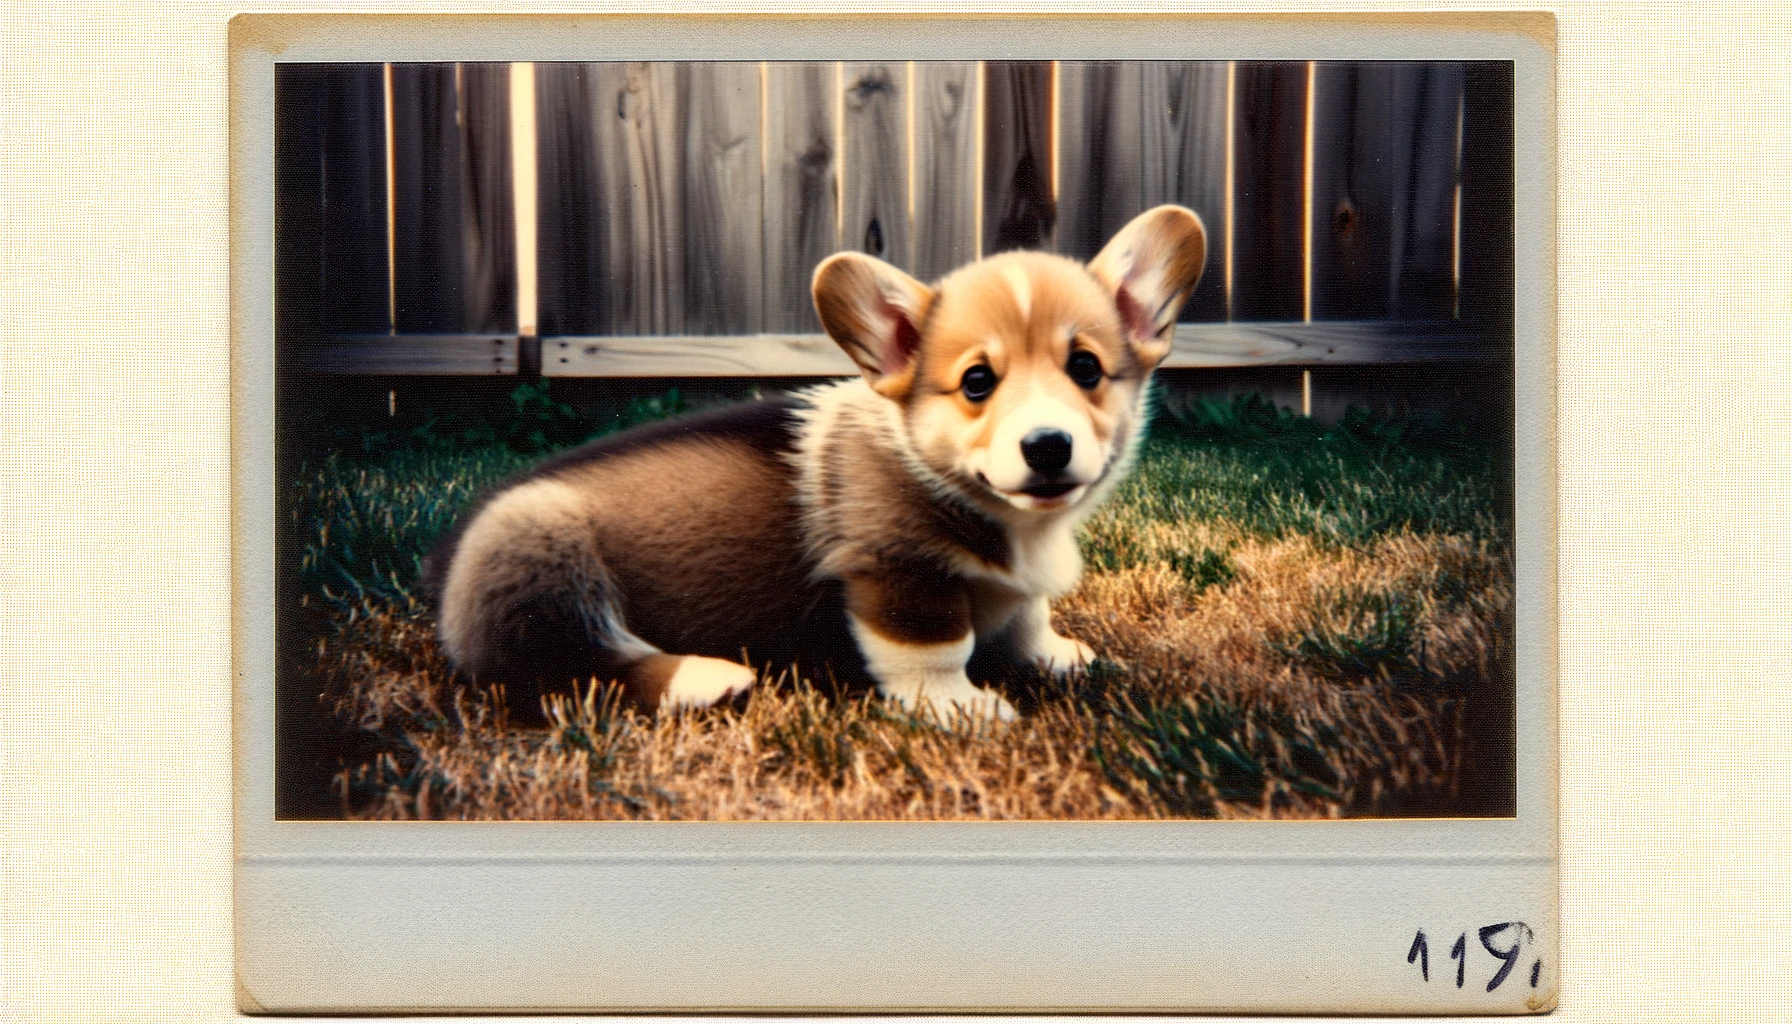 First known photo of a Corgi Lab Mix, dating back to the early 2000s